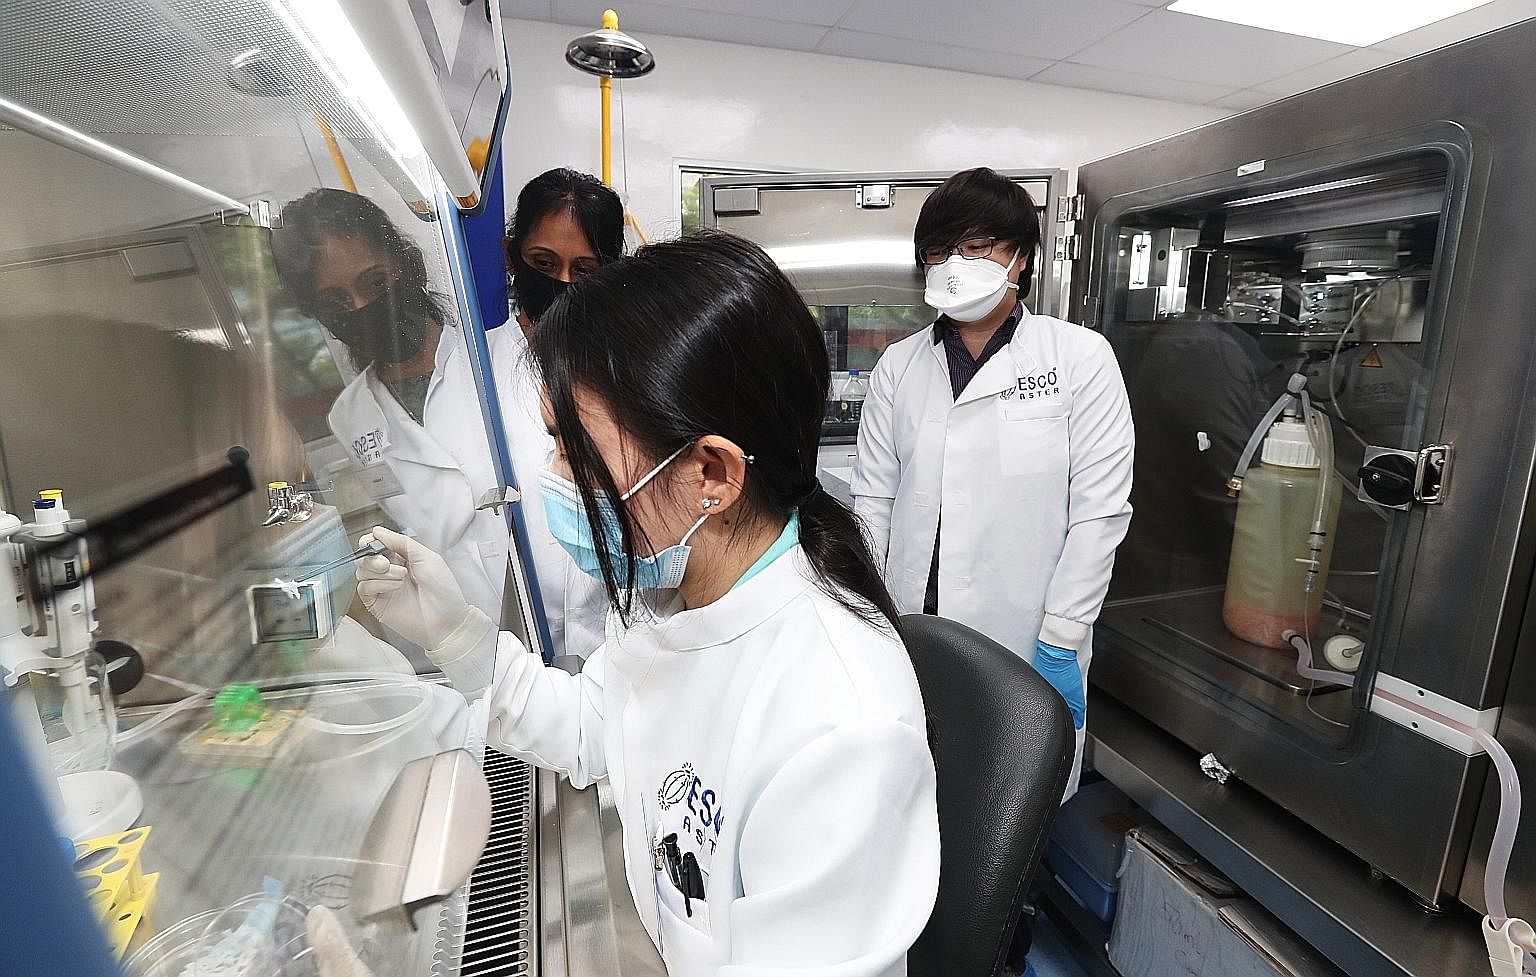 (Clockwise from foreground) Esco Aster research officer Micaela Goh, senior bioprocess scientist Nandini Prabhakar and CEO Lin Xiangliang in the firm's lab. On the right is the bioreactor used to culture the vaccine.